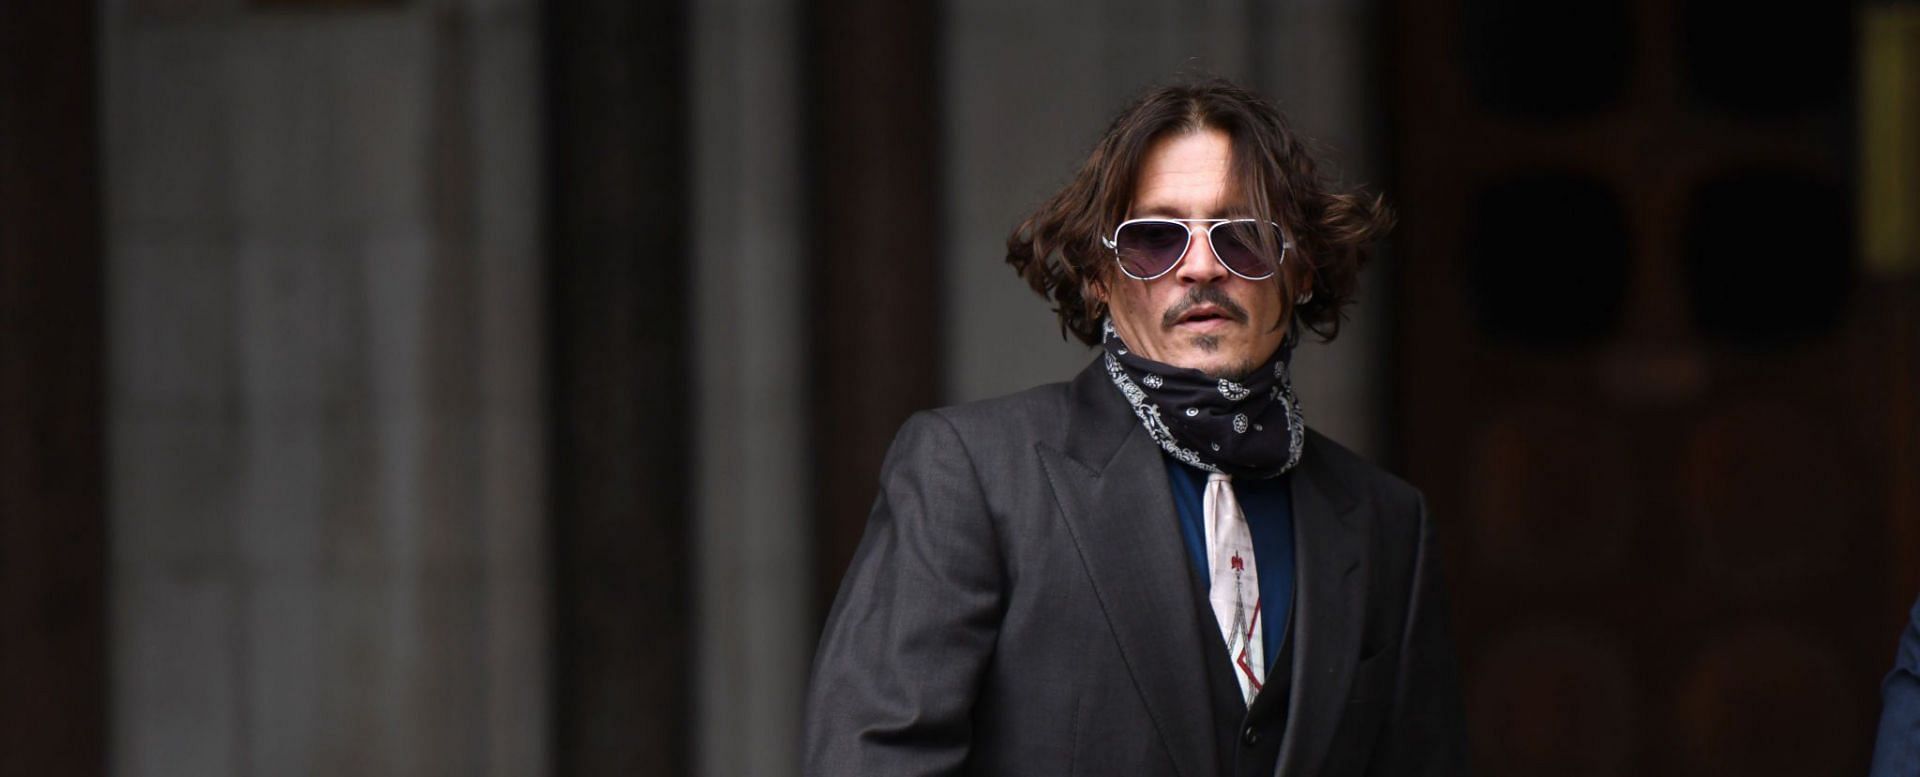 Johnny Depp is the youngest of his four siblings (Image via Getty Images)